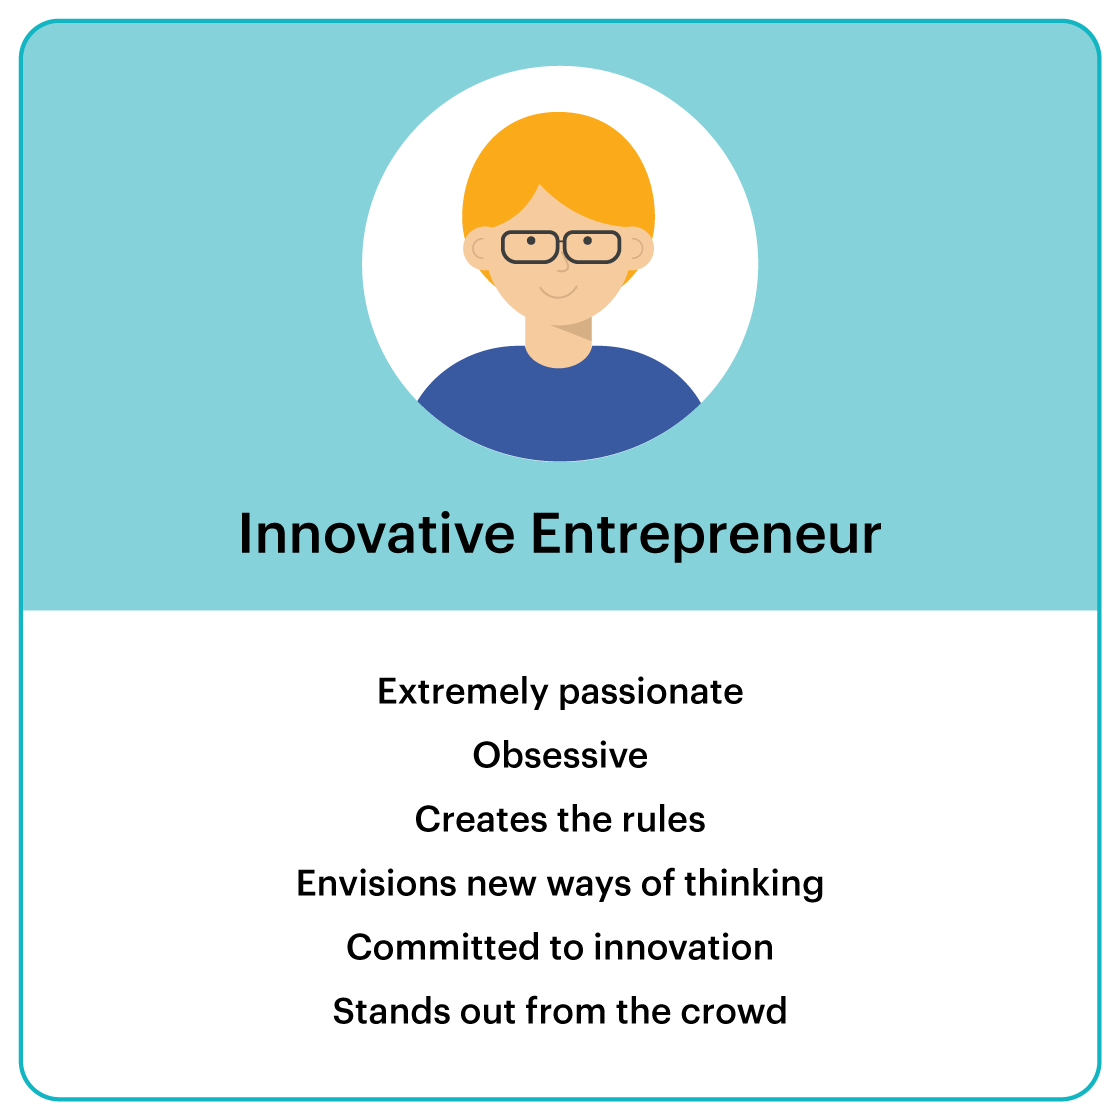 Infographic depicting an illustration of an innovative entrepreneur and 6 common characteristics